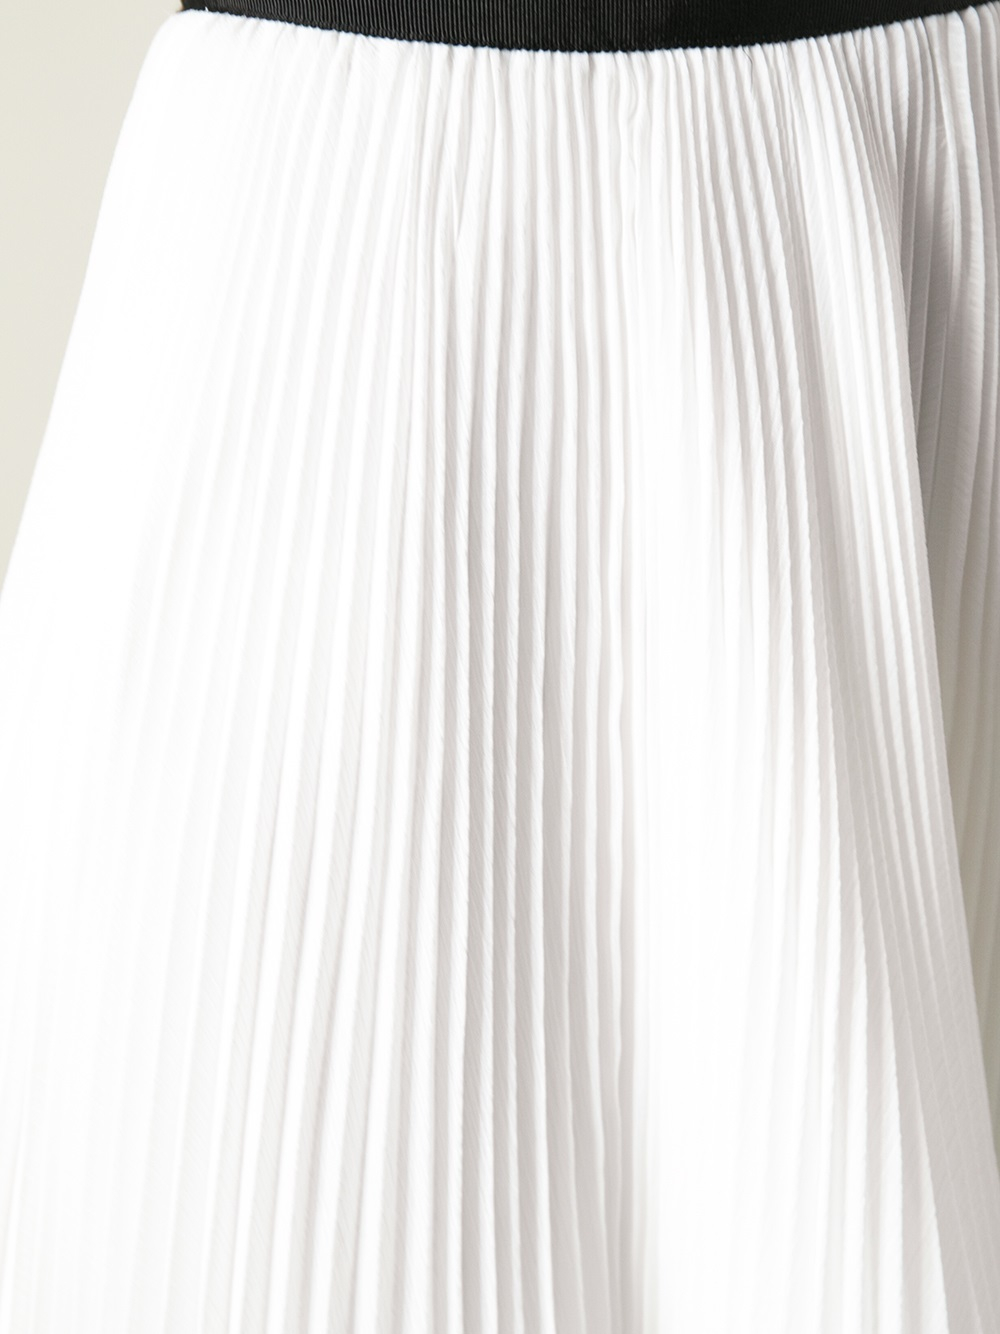 Alice + olivia Pleated Skirt in White | Lyst